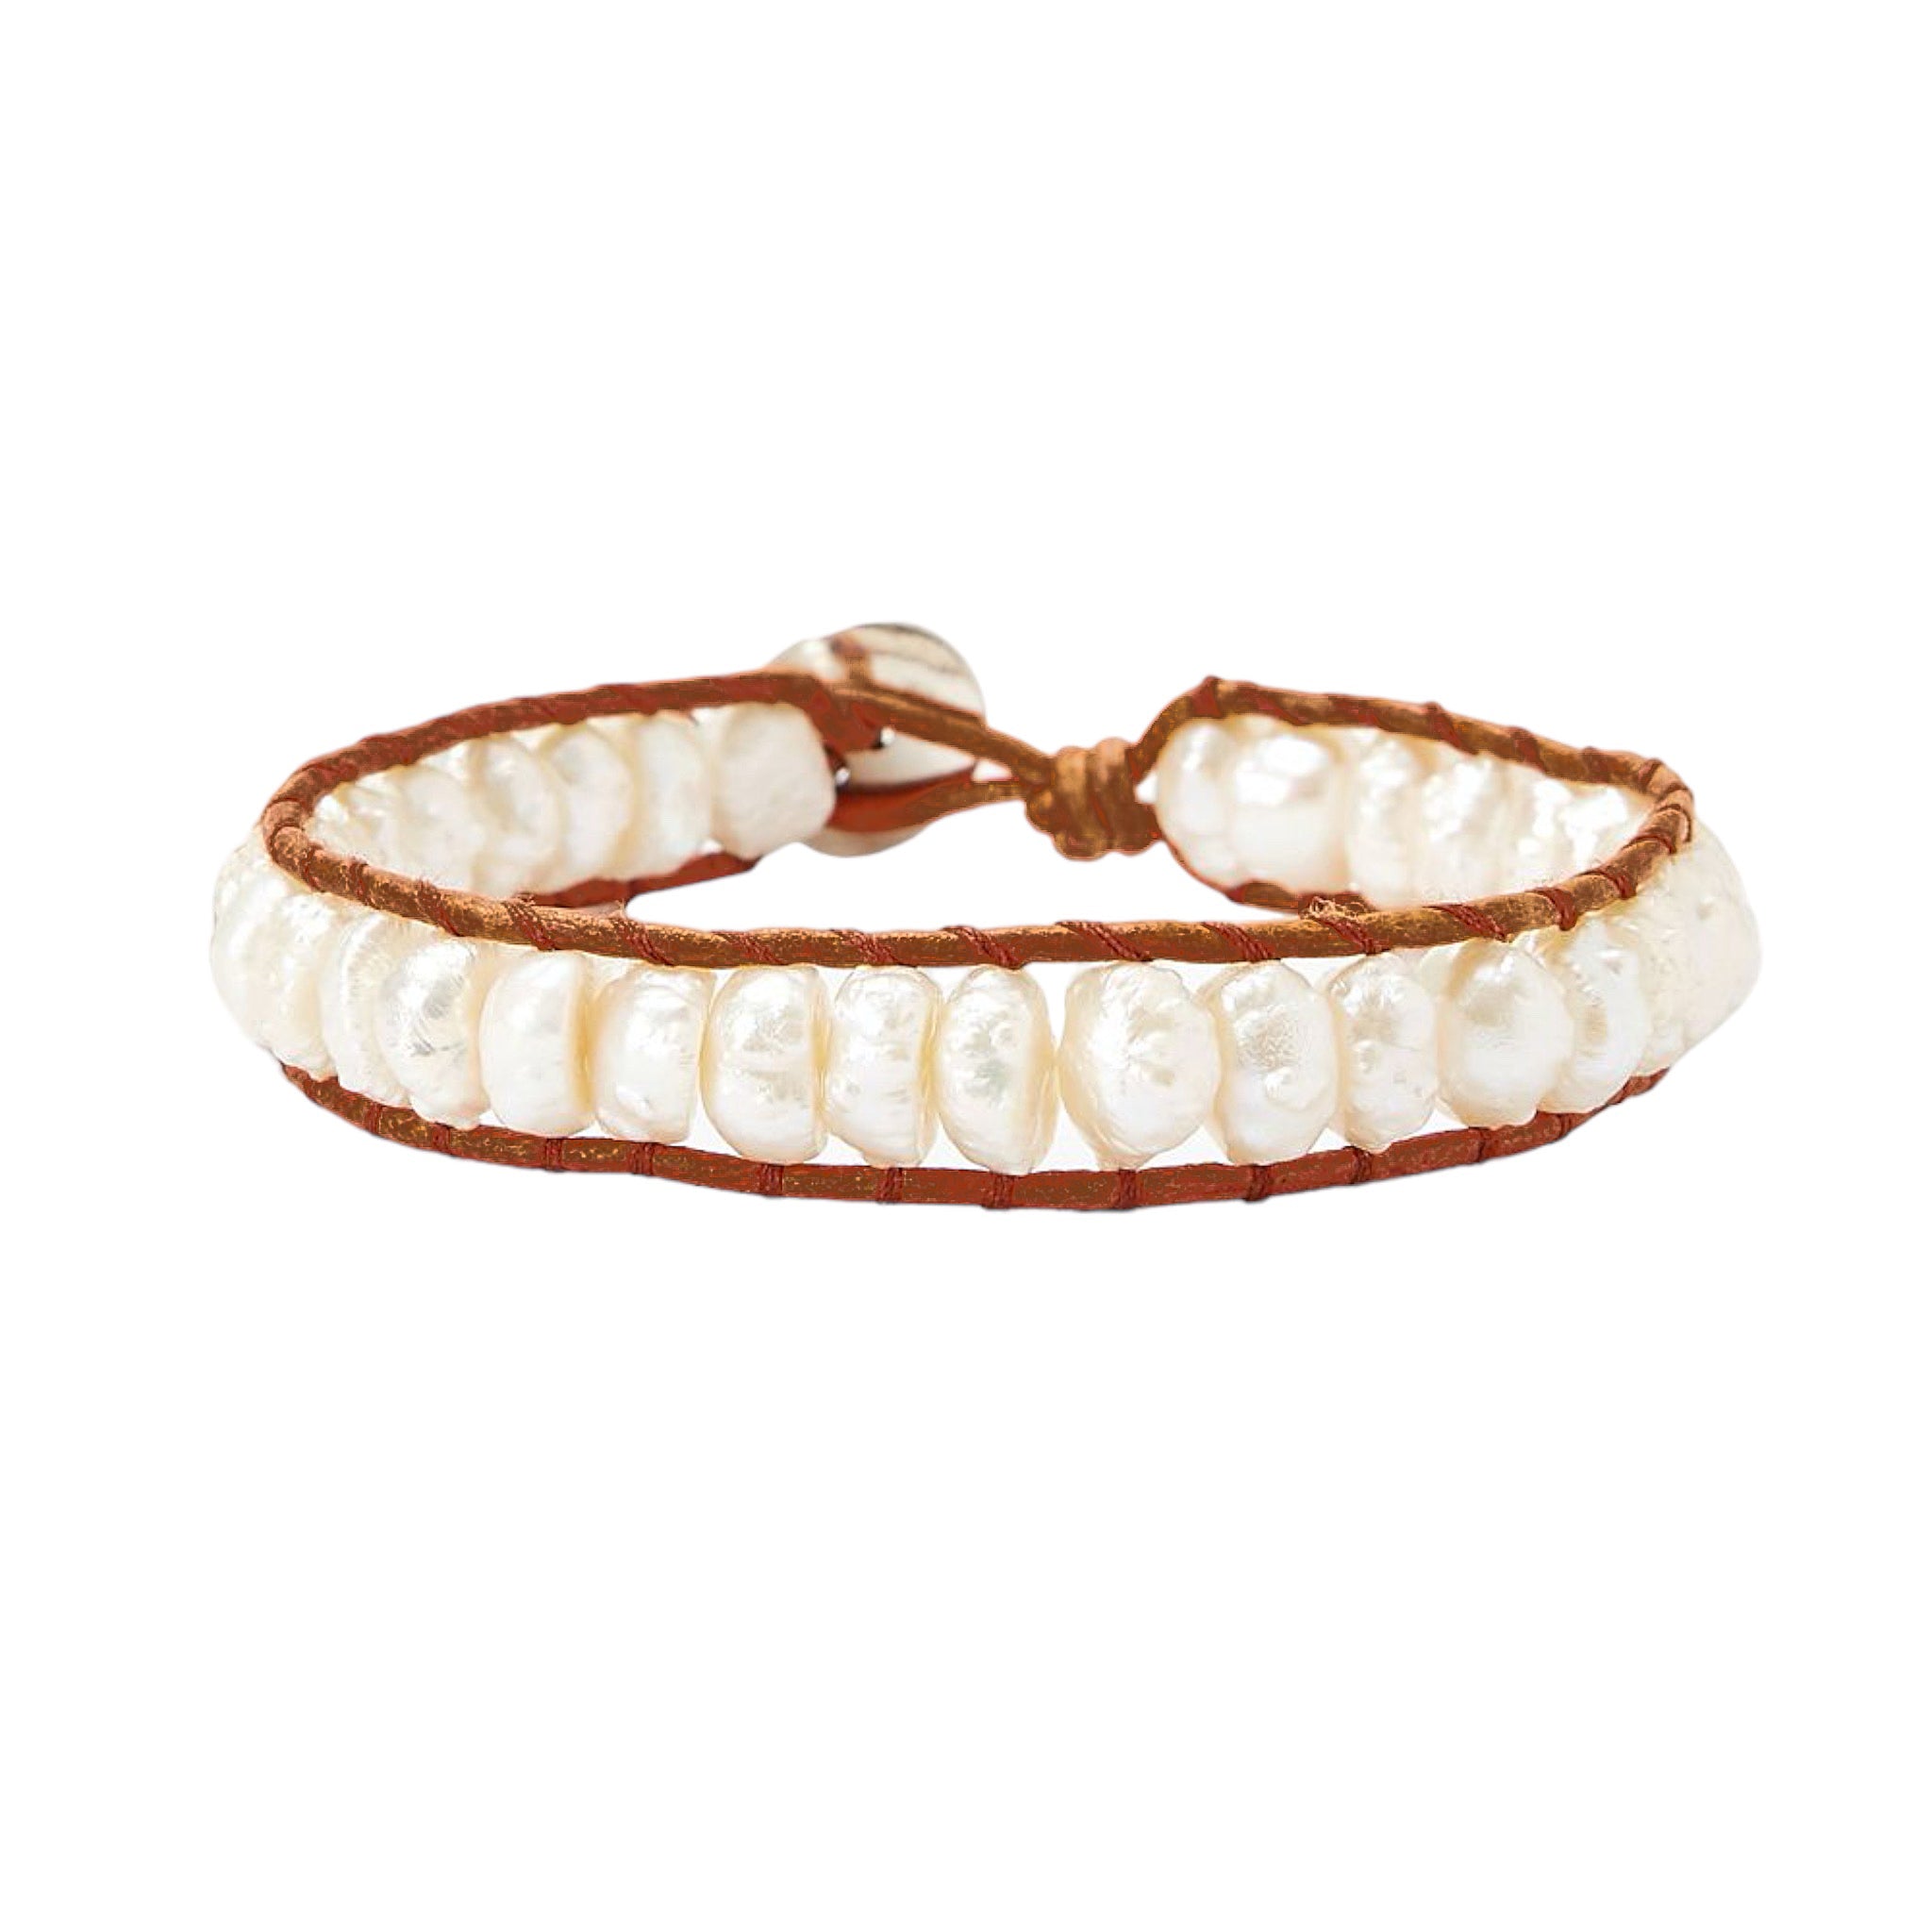 Chan Luu Single Wrap Bracelet with White Pearl and Silver on Brown Leather